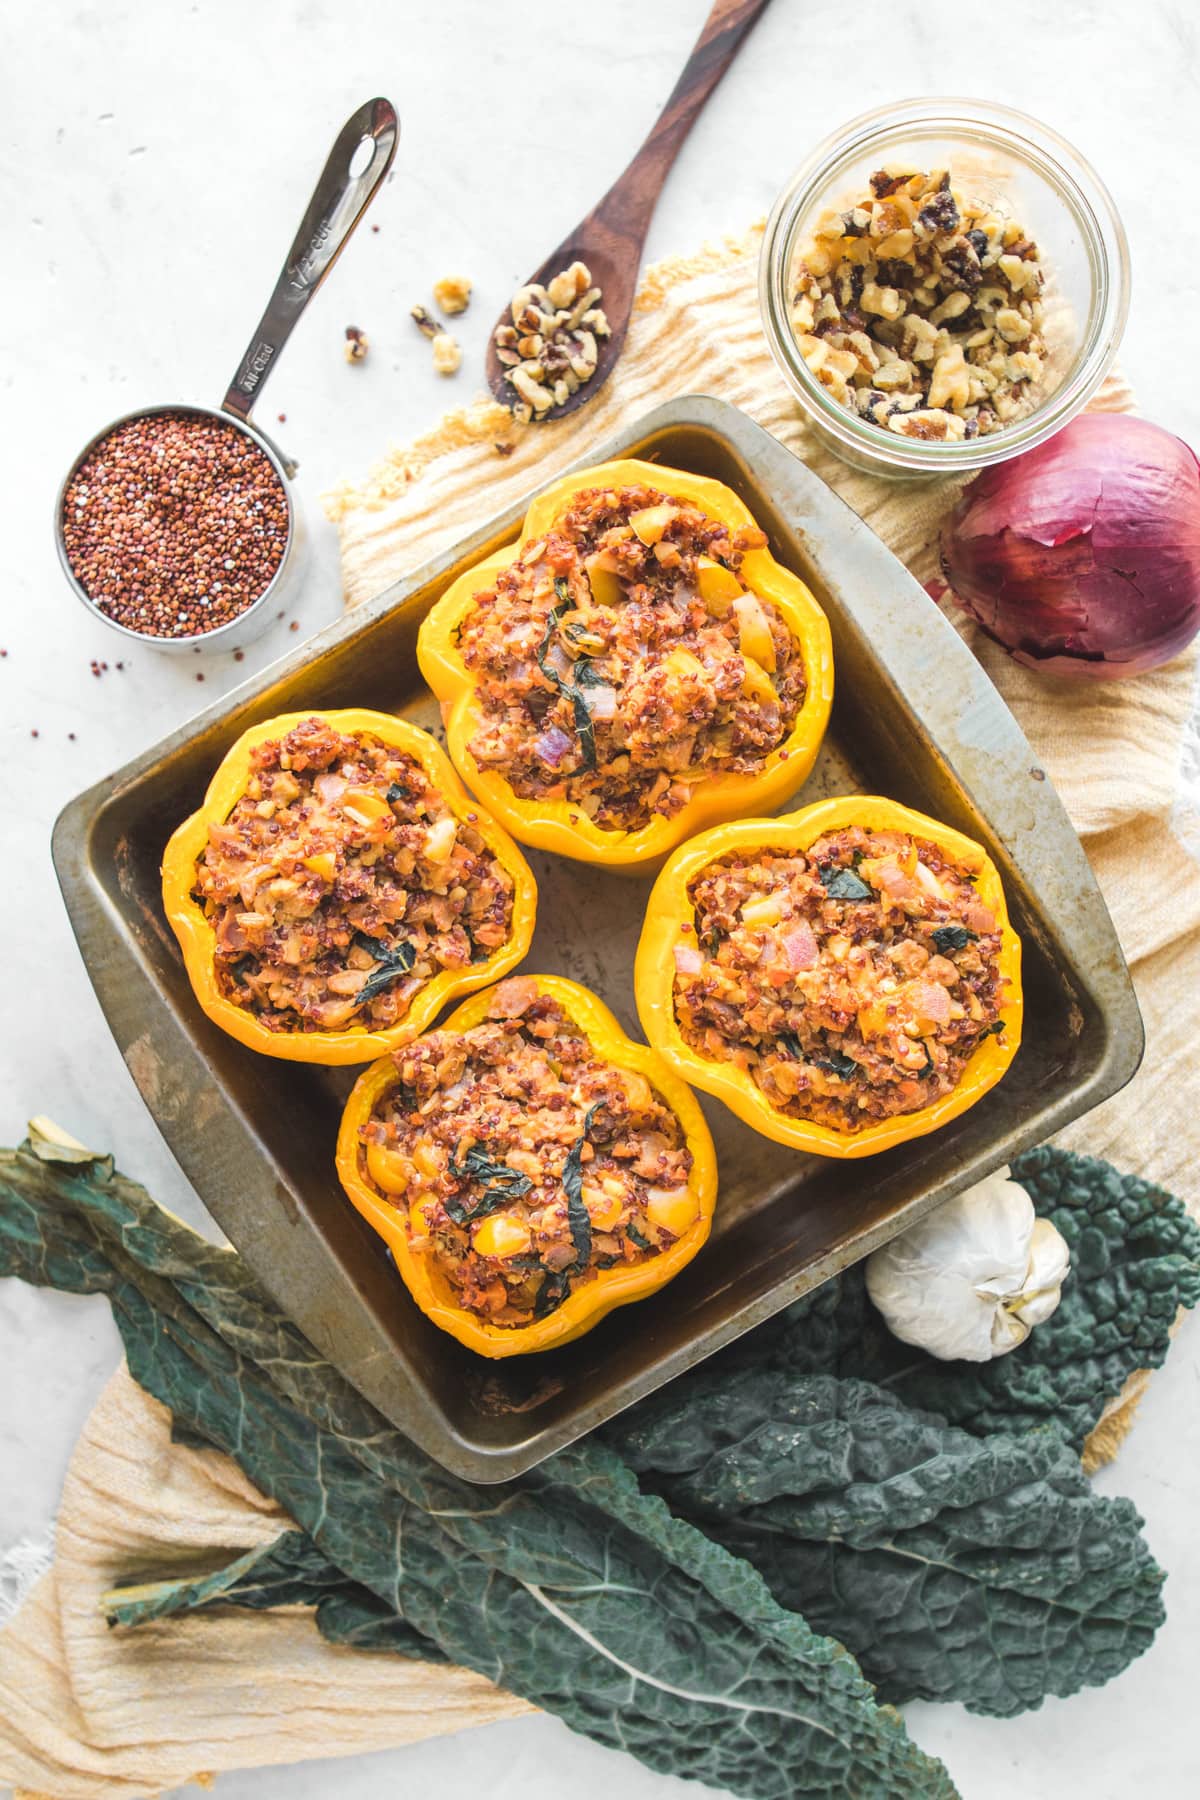 kale and quinoa vegan stuffed peppers in baking dish